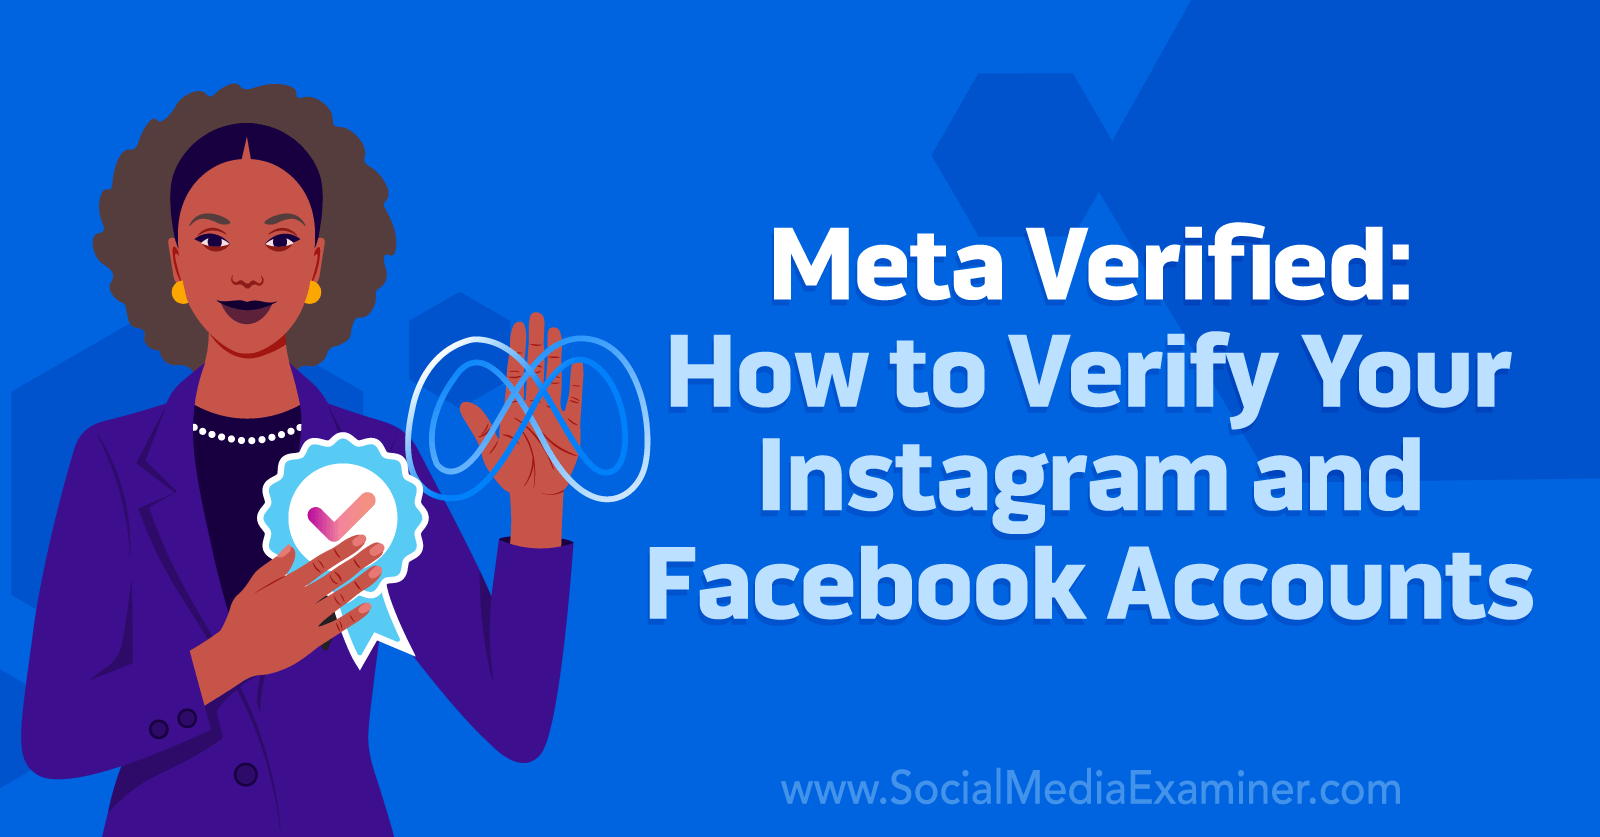 Meta Verified: How to Verify Your Instagram and Facebook Accounts by Social Media Examiner